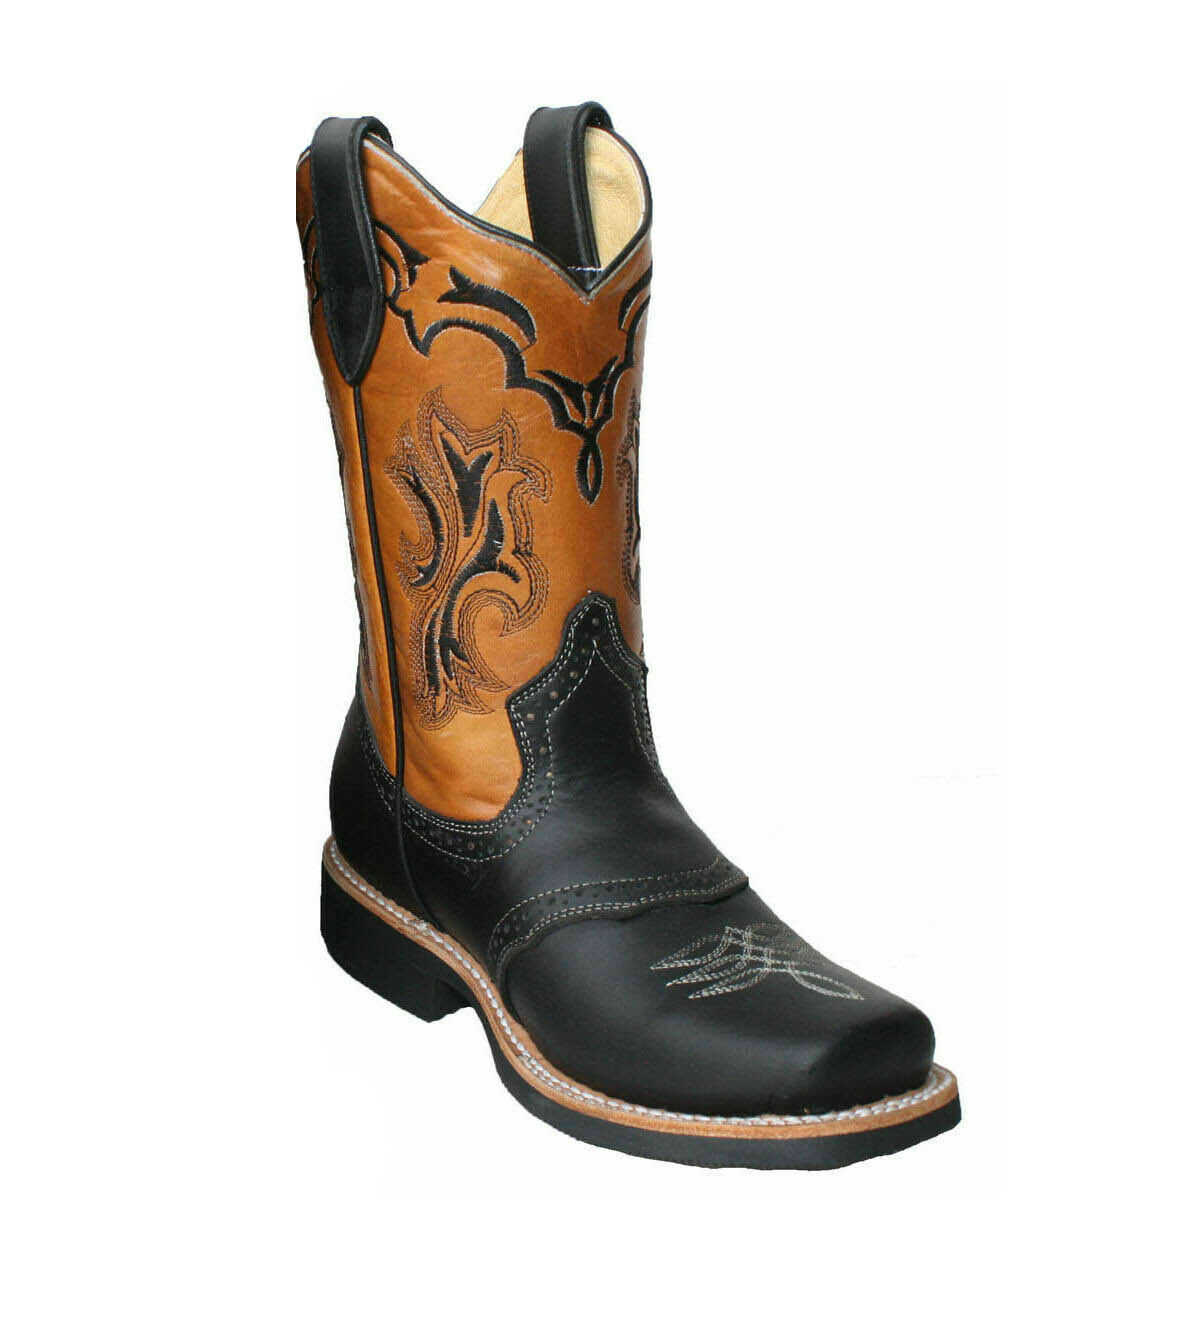  Children Youth Sizes Cowboy Boots Leather Square Toe Rodeo  Boys Western Plain_Black_3